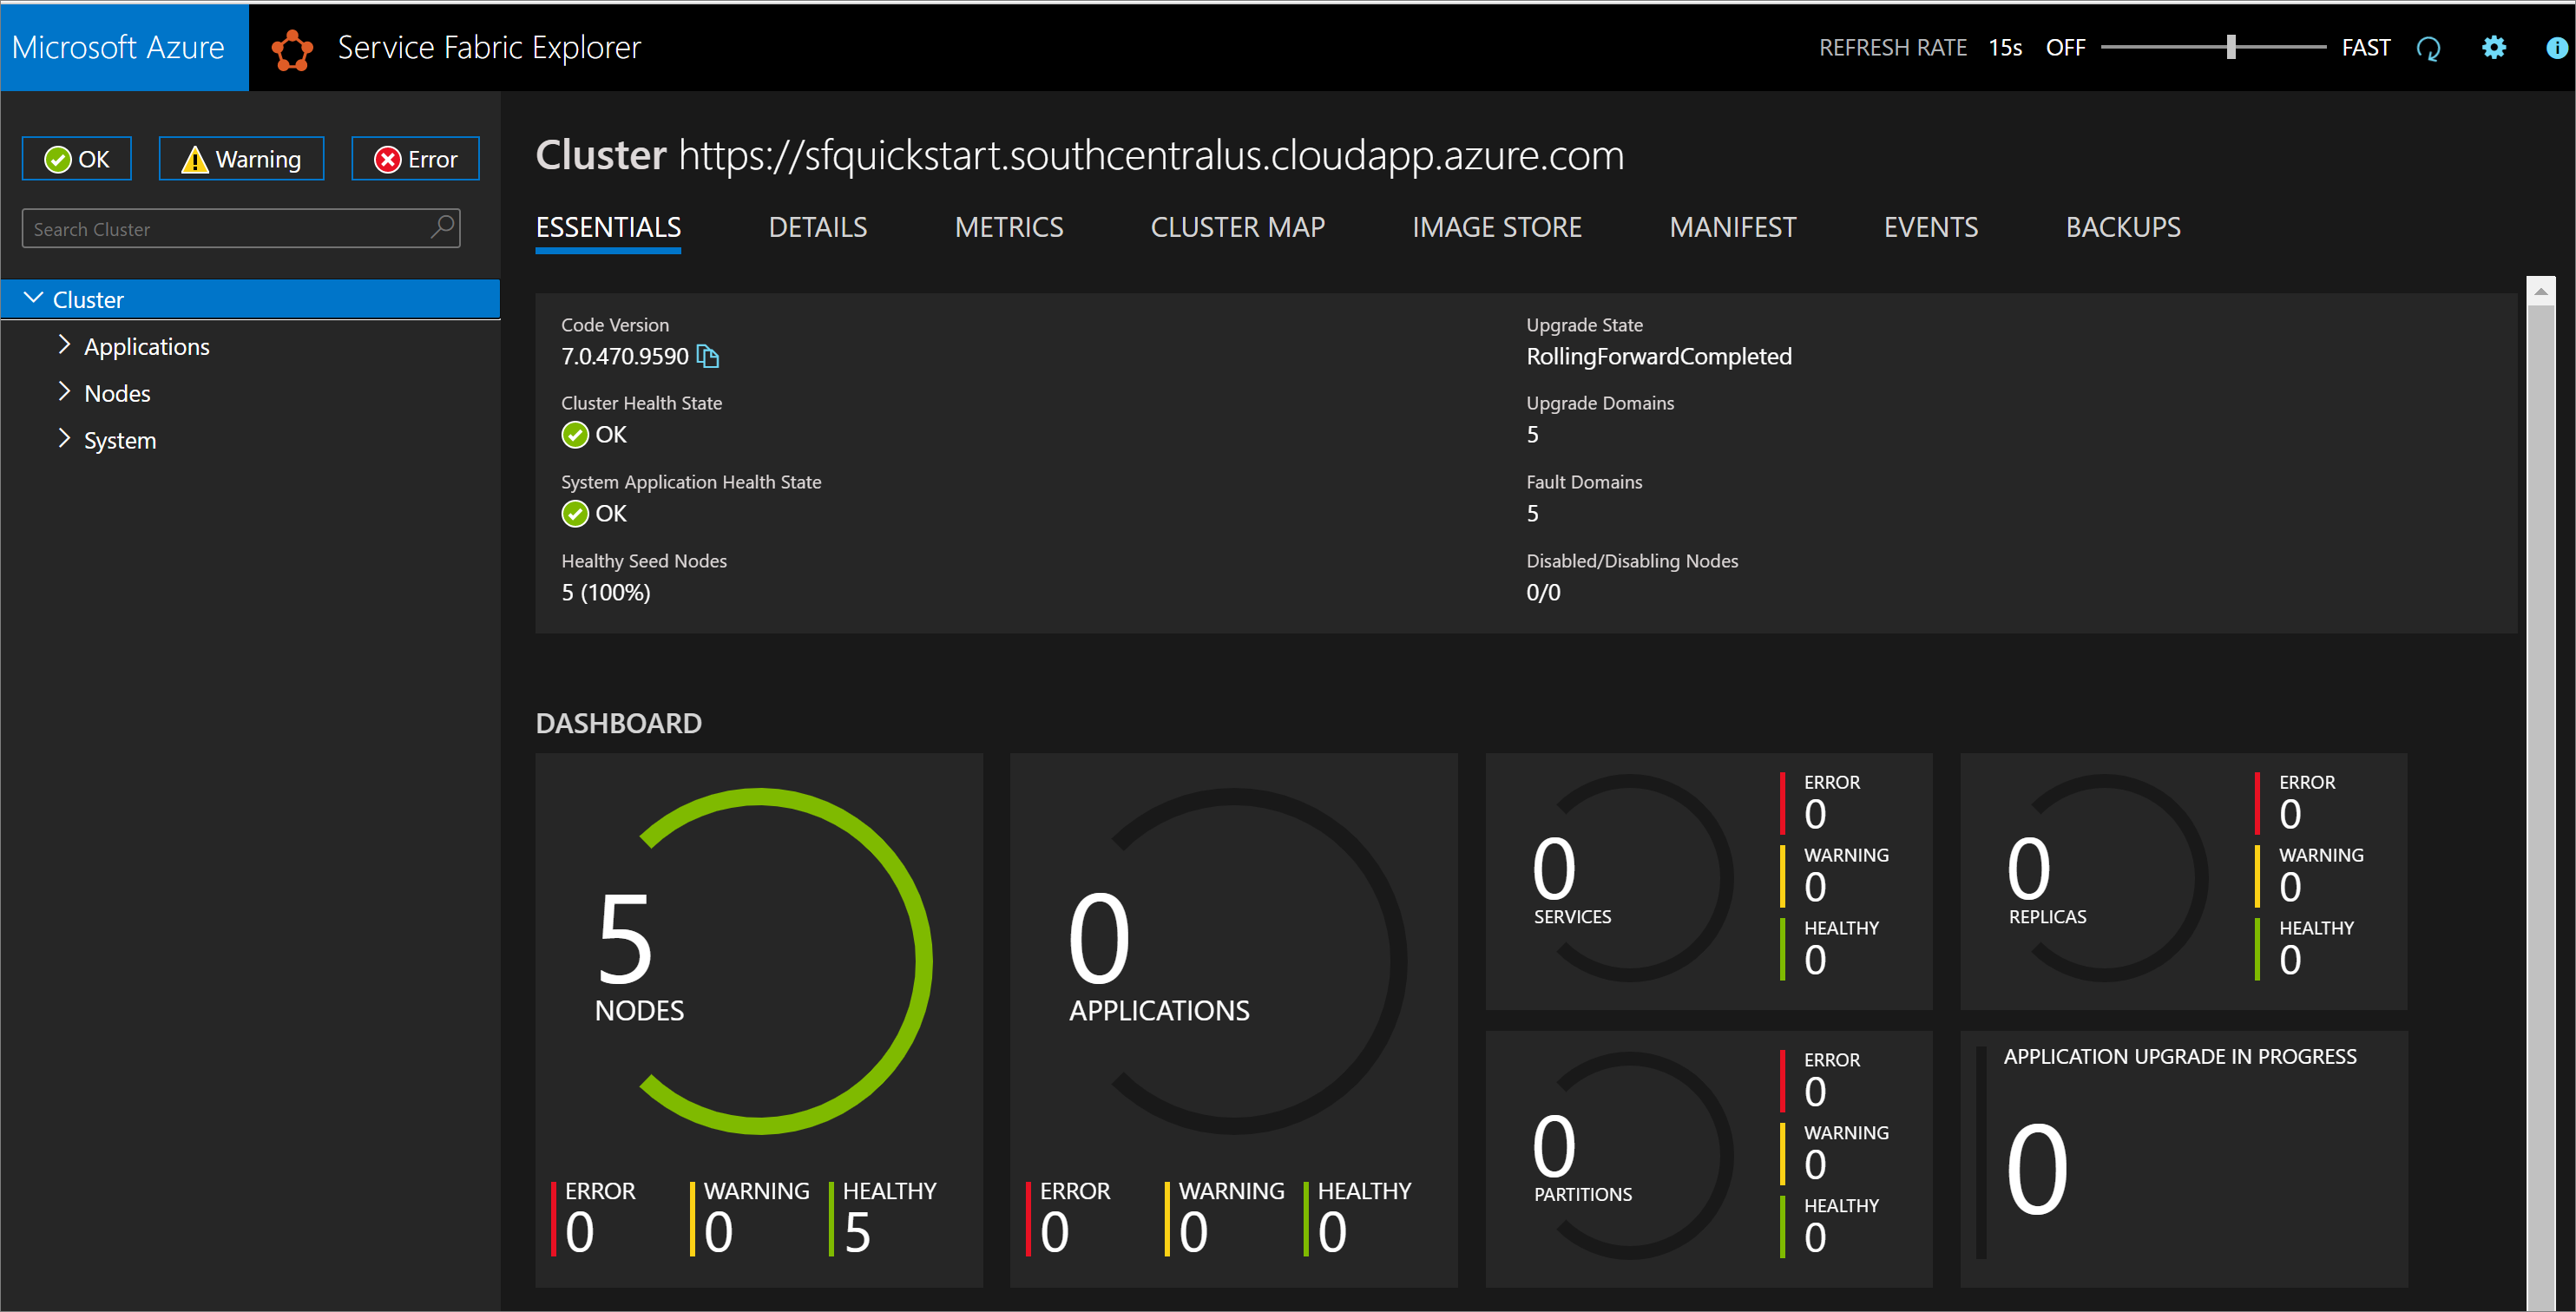 Service Fabric Explorer showing new cluster